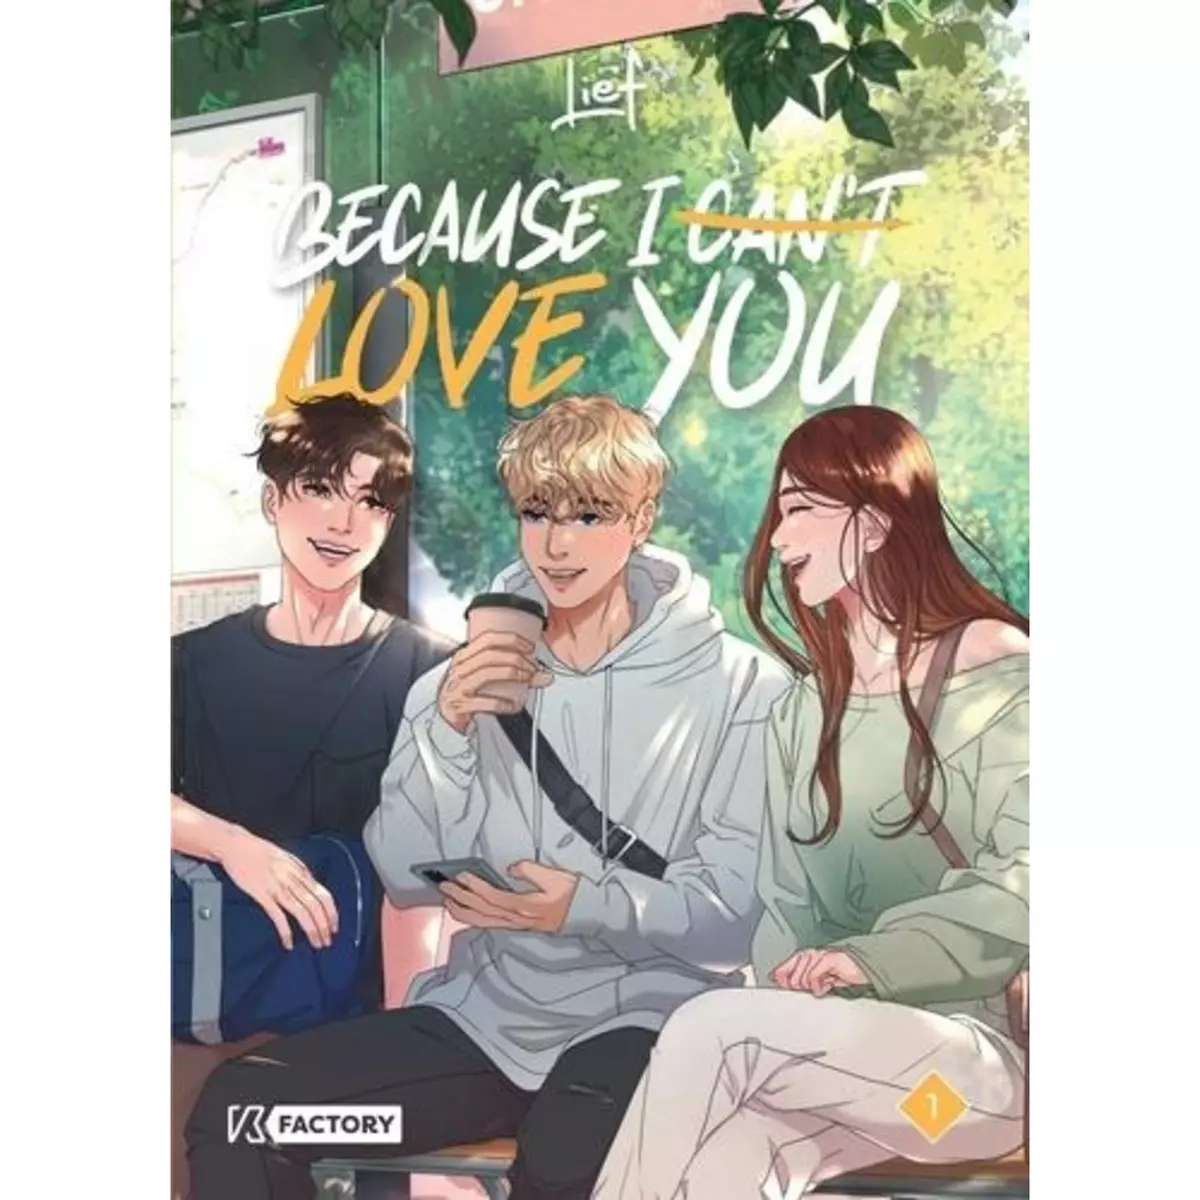  BECAUSE I CAN'T LOVE YOU TOME 1 , Lief